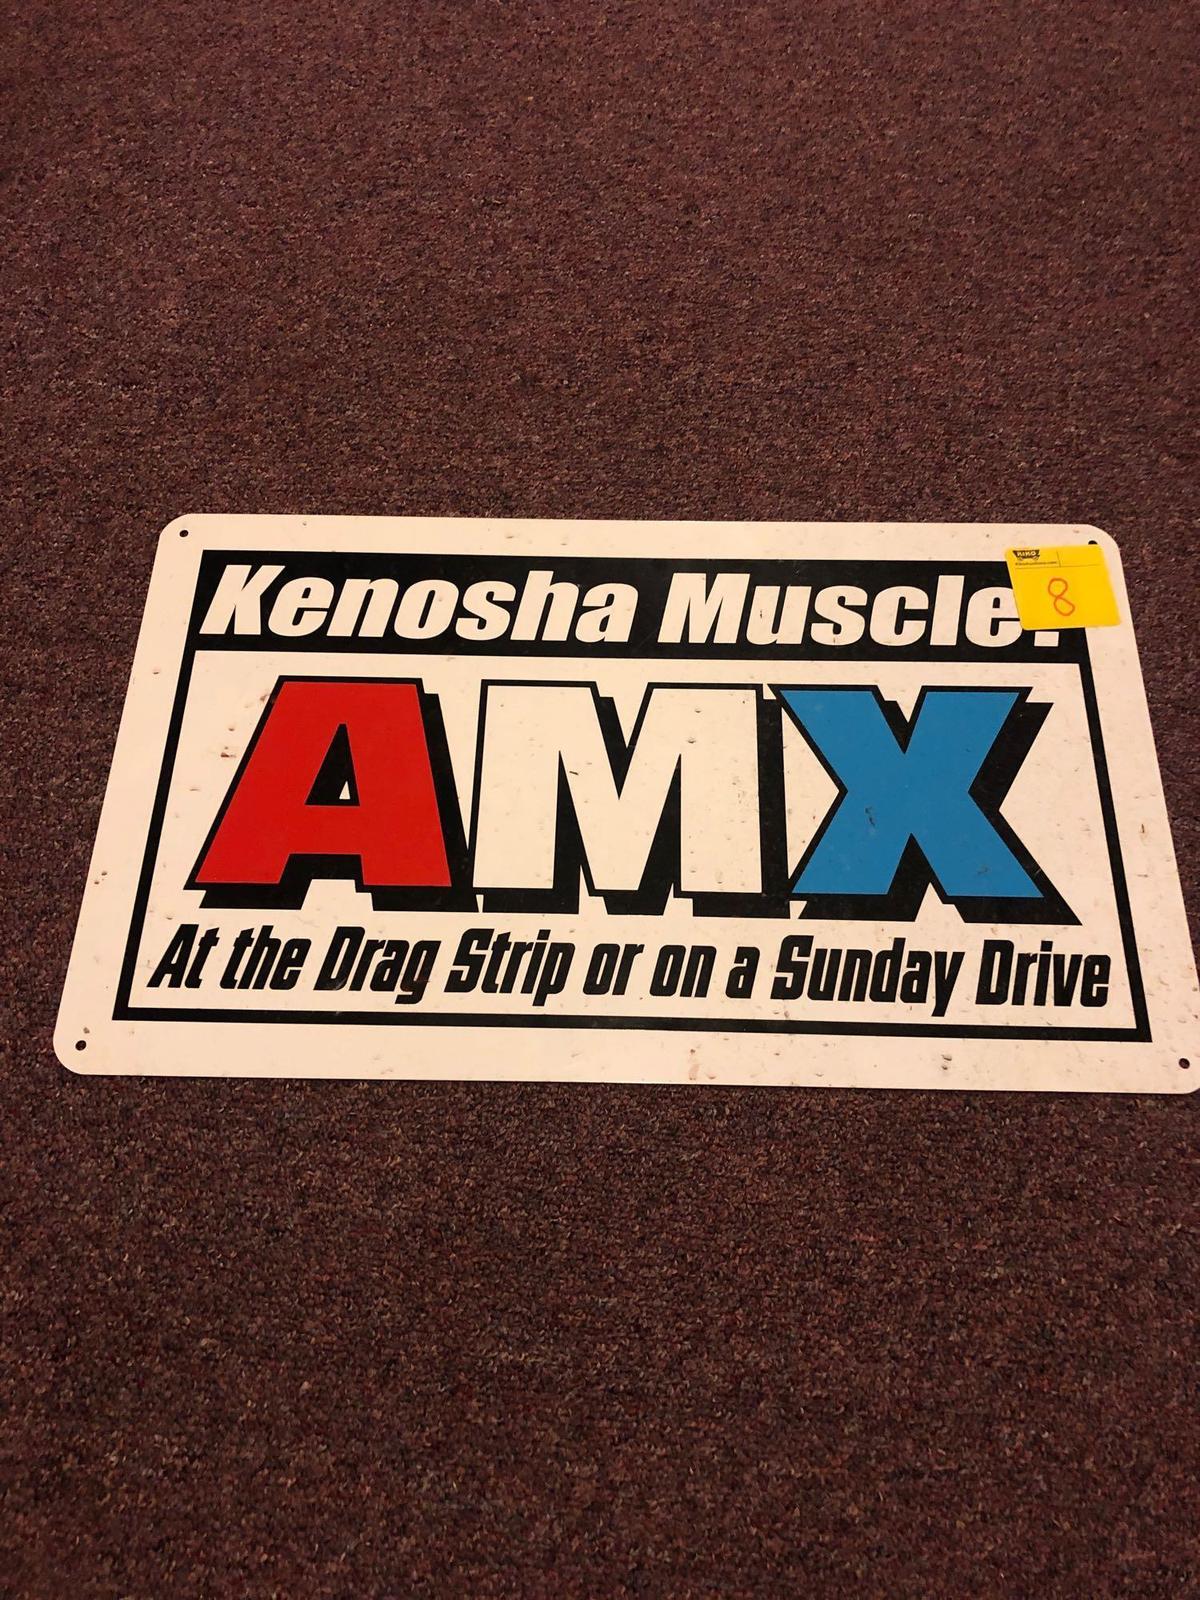 Kenosha Muscle AMX At the Drag Strip or on a Sunday Drive metal sign